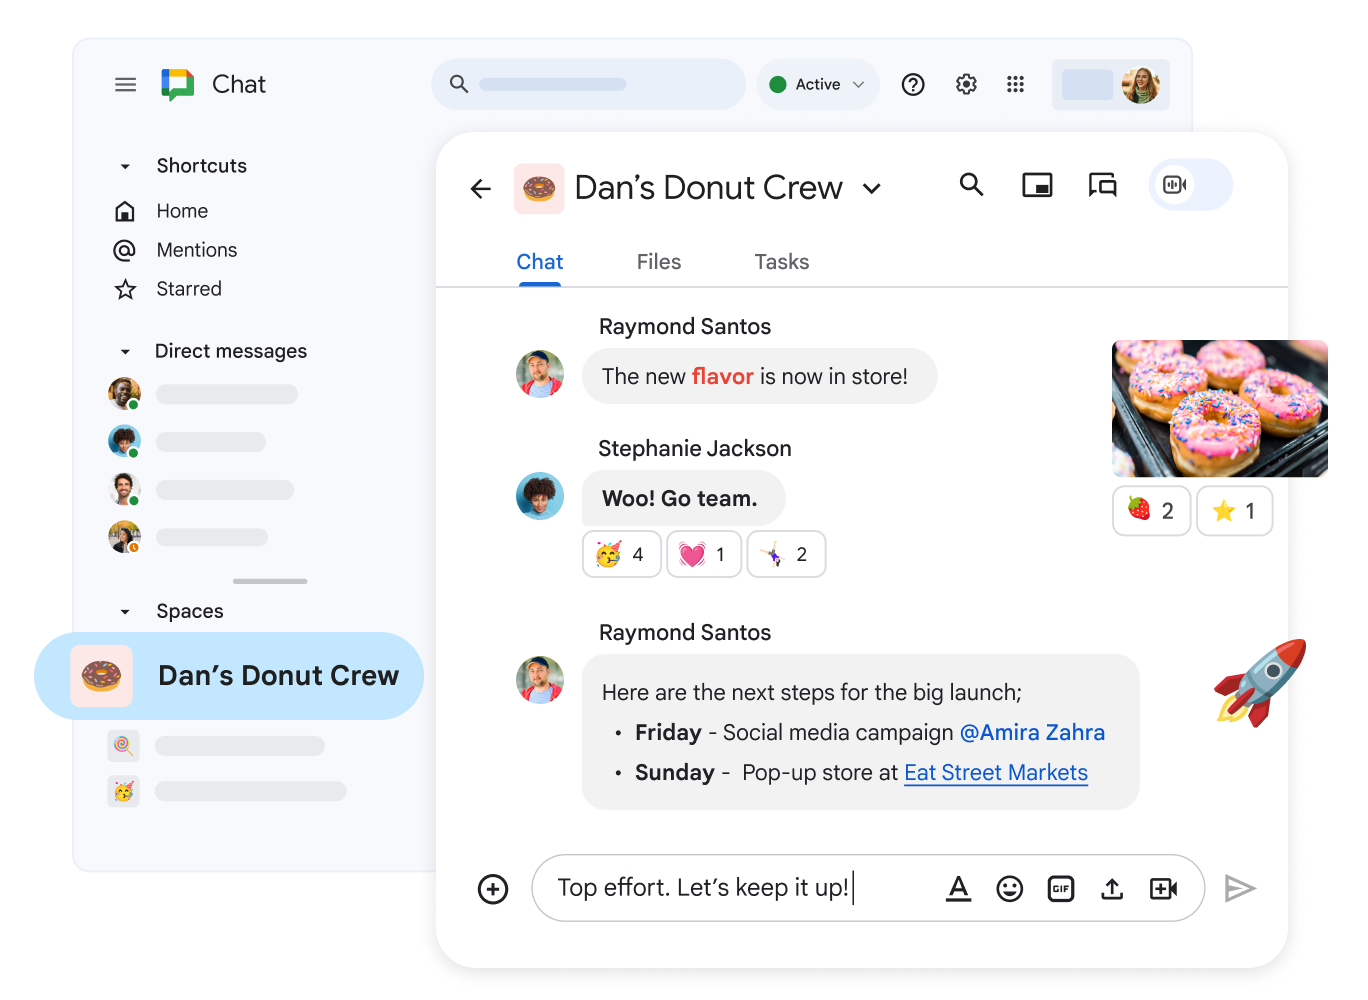 Chat space for Dan's doughnut crew about the success of the new doughnut flavor.